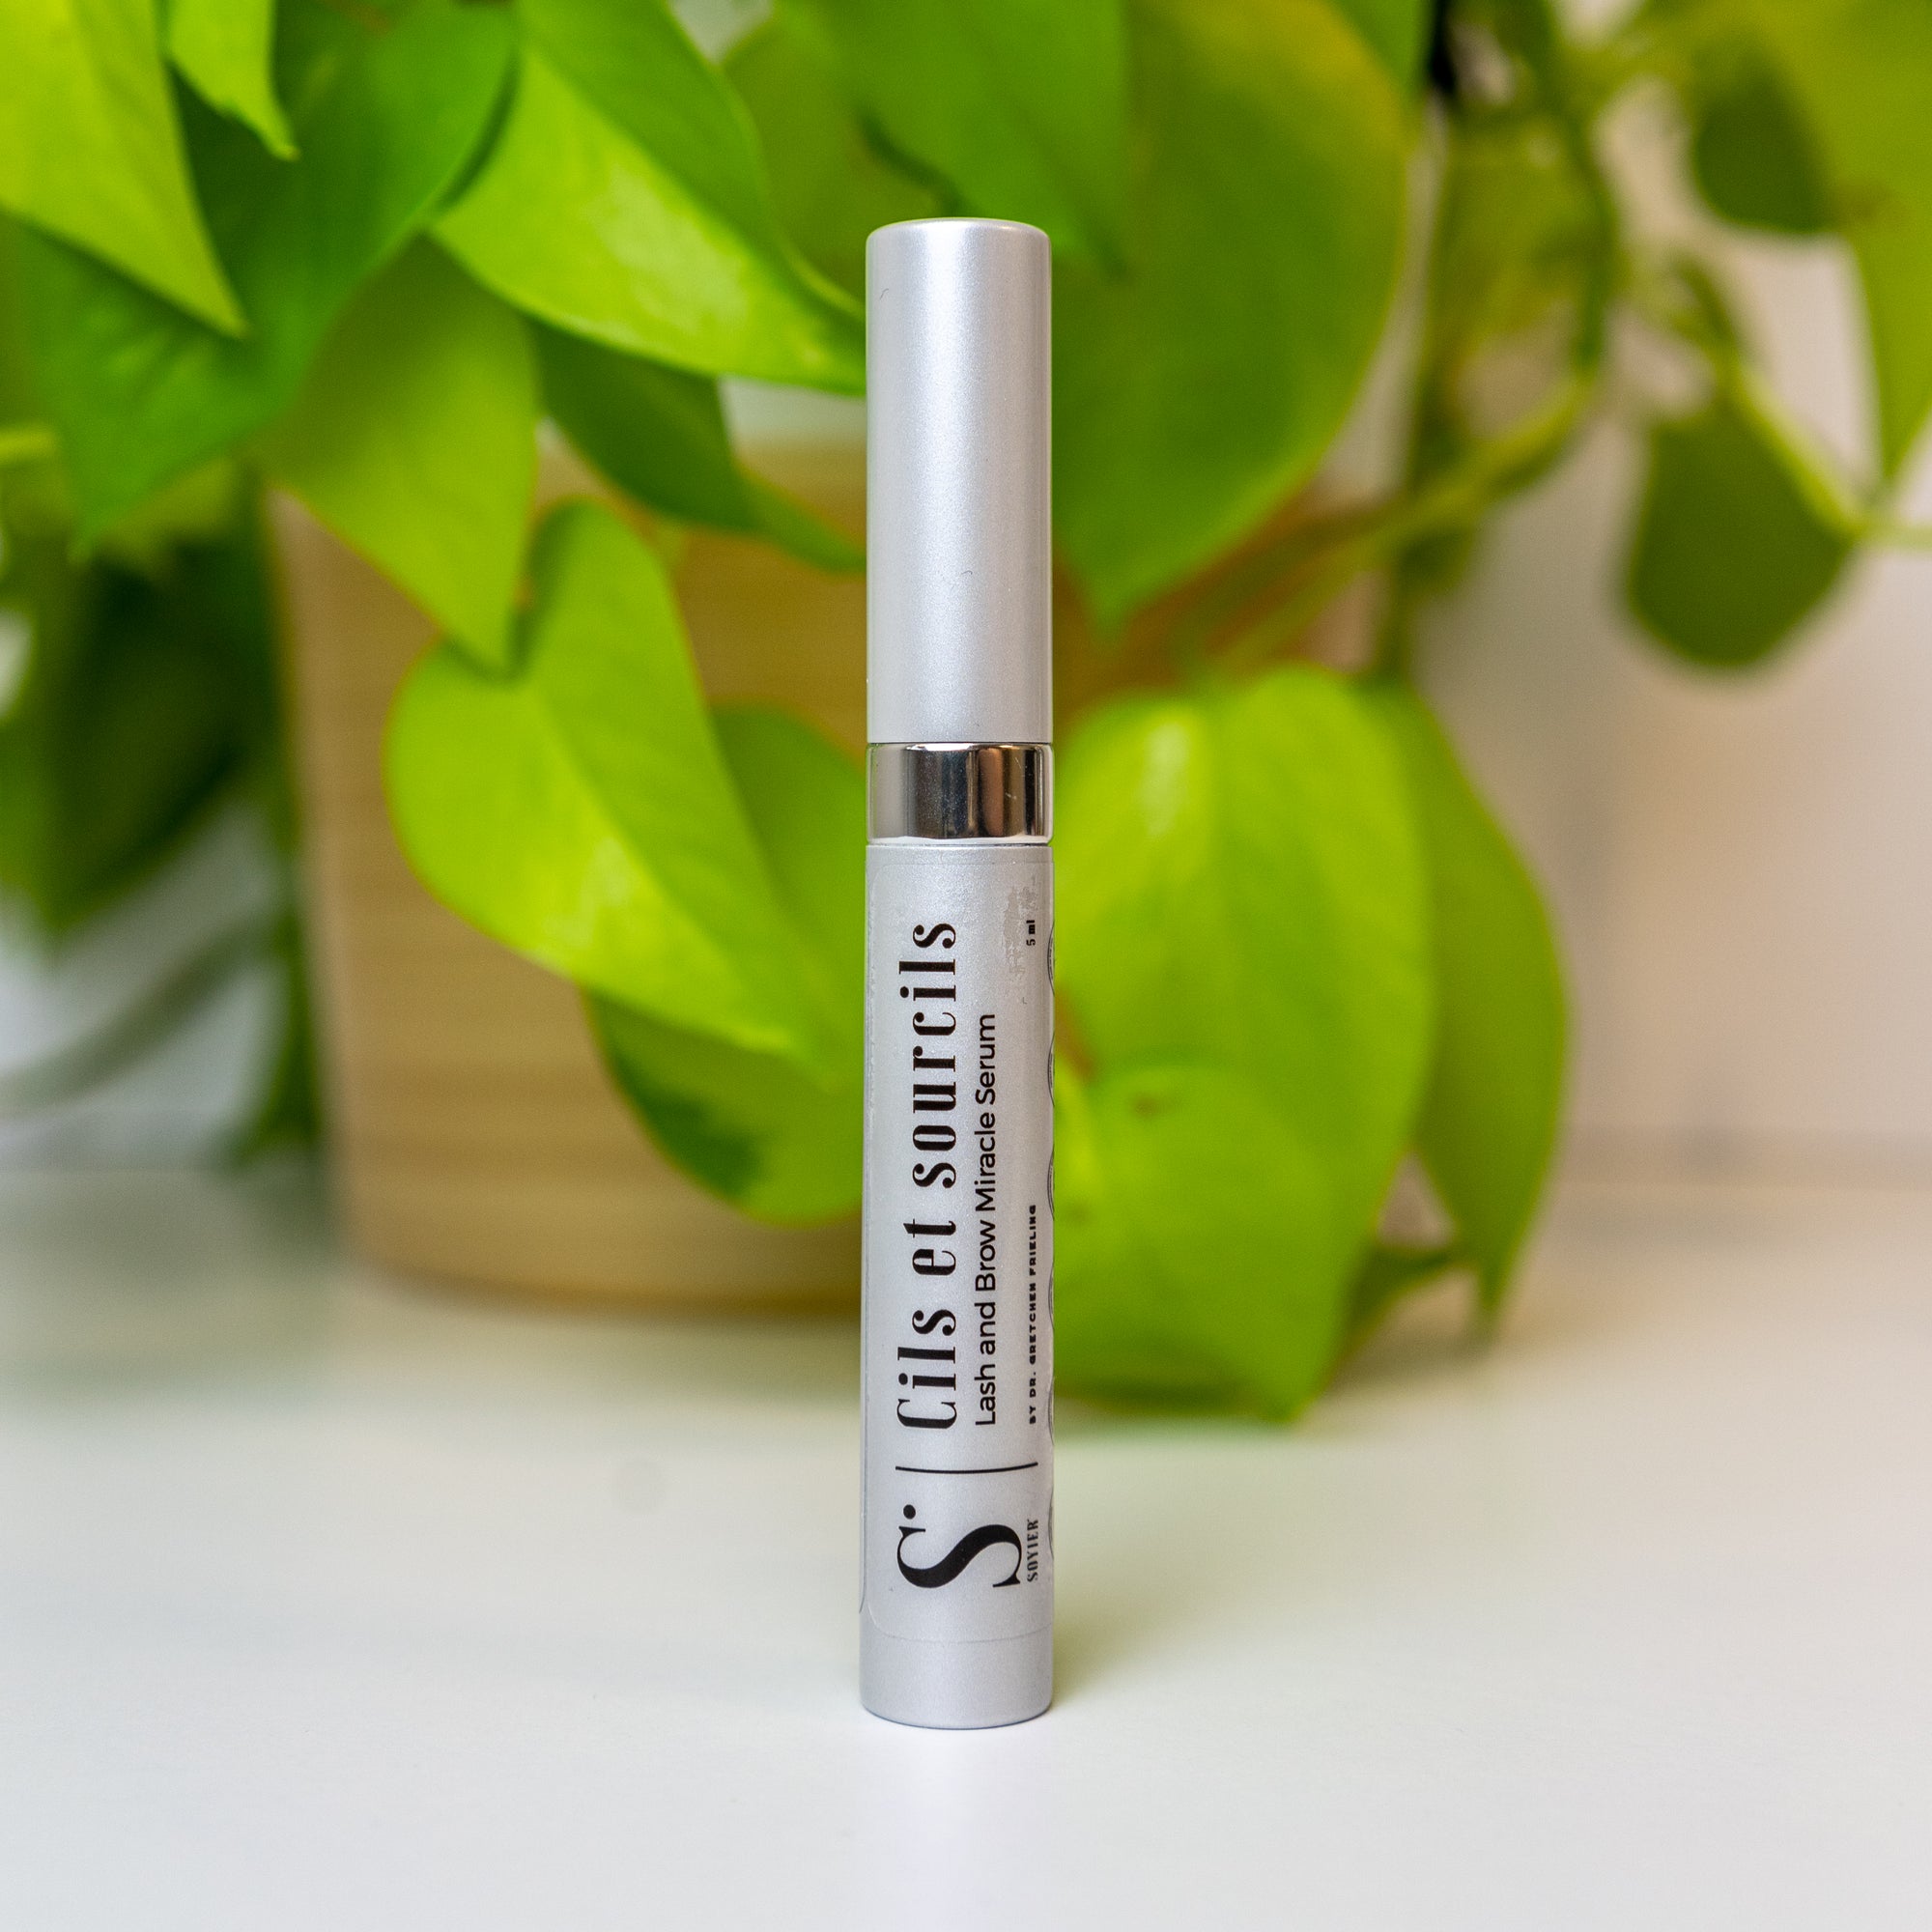 Cils et Sourcils: Lash and Brow Miracle Serum